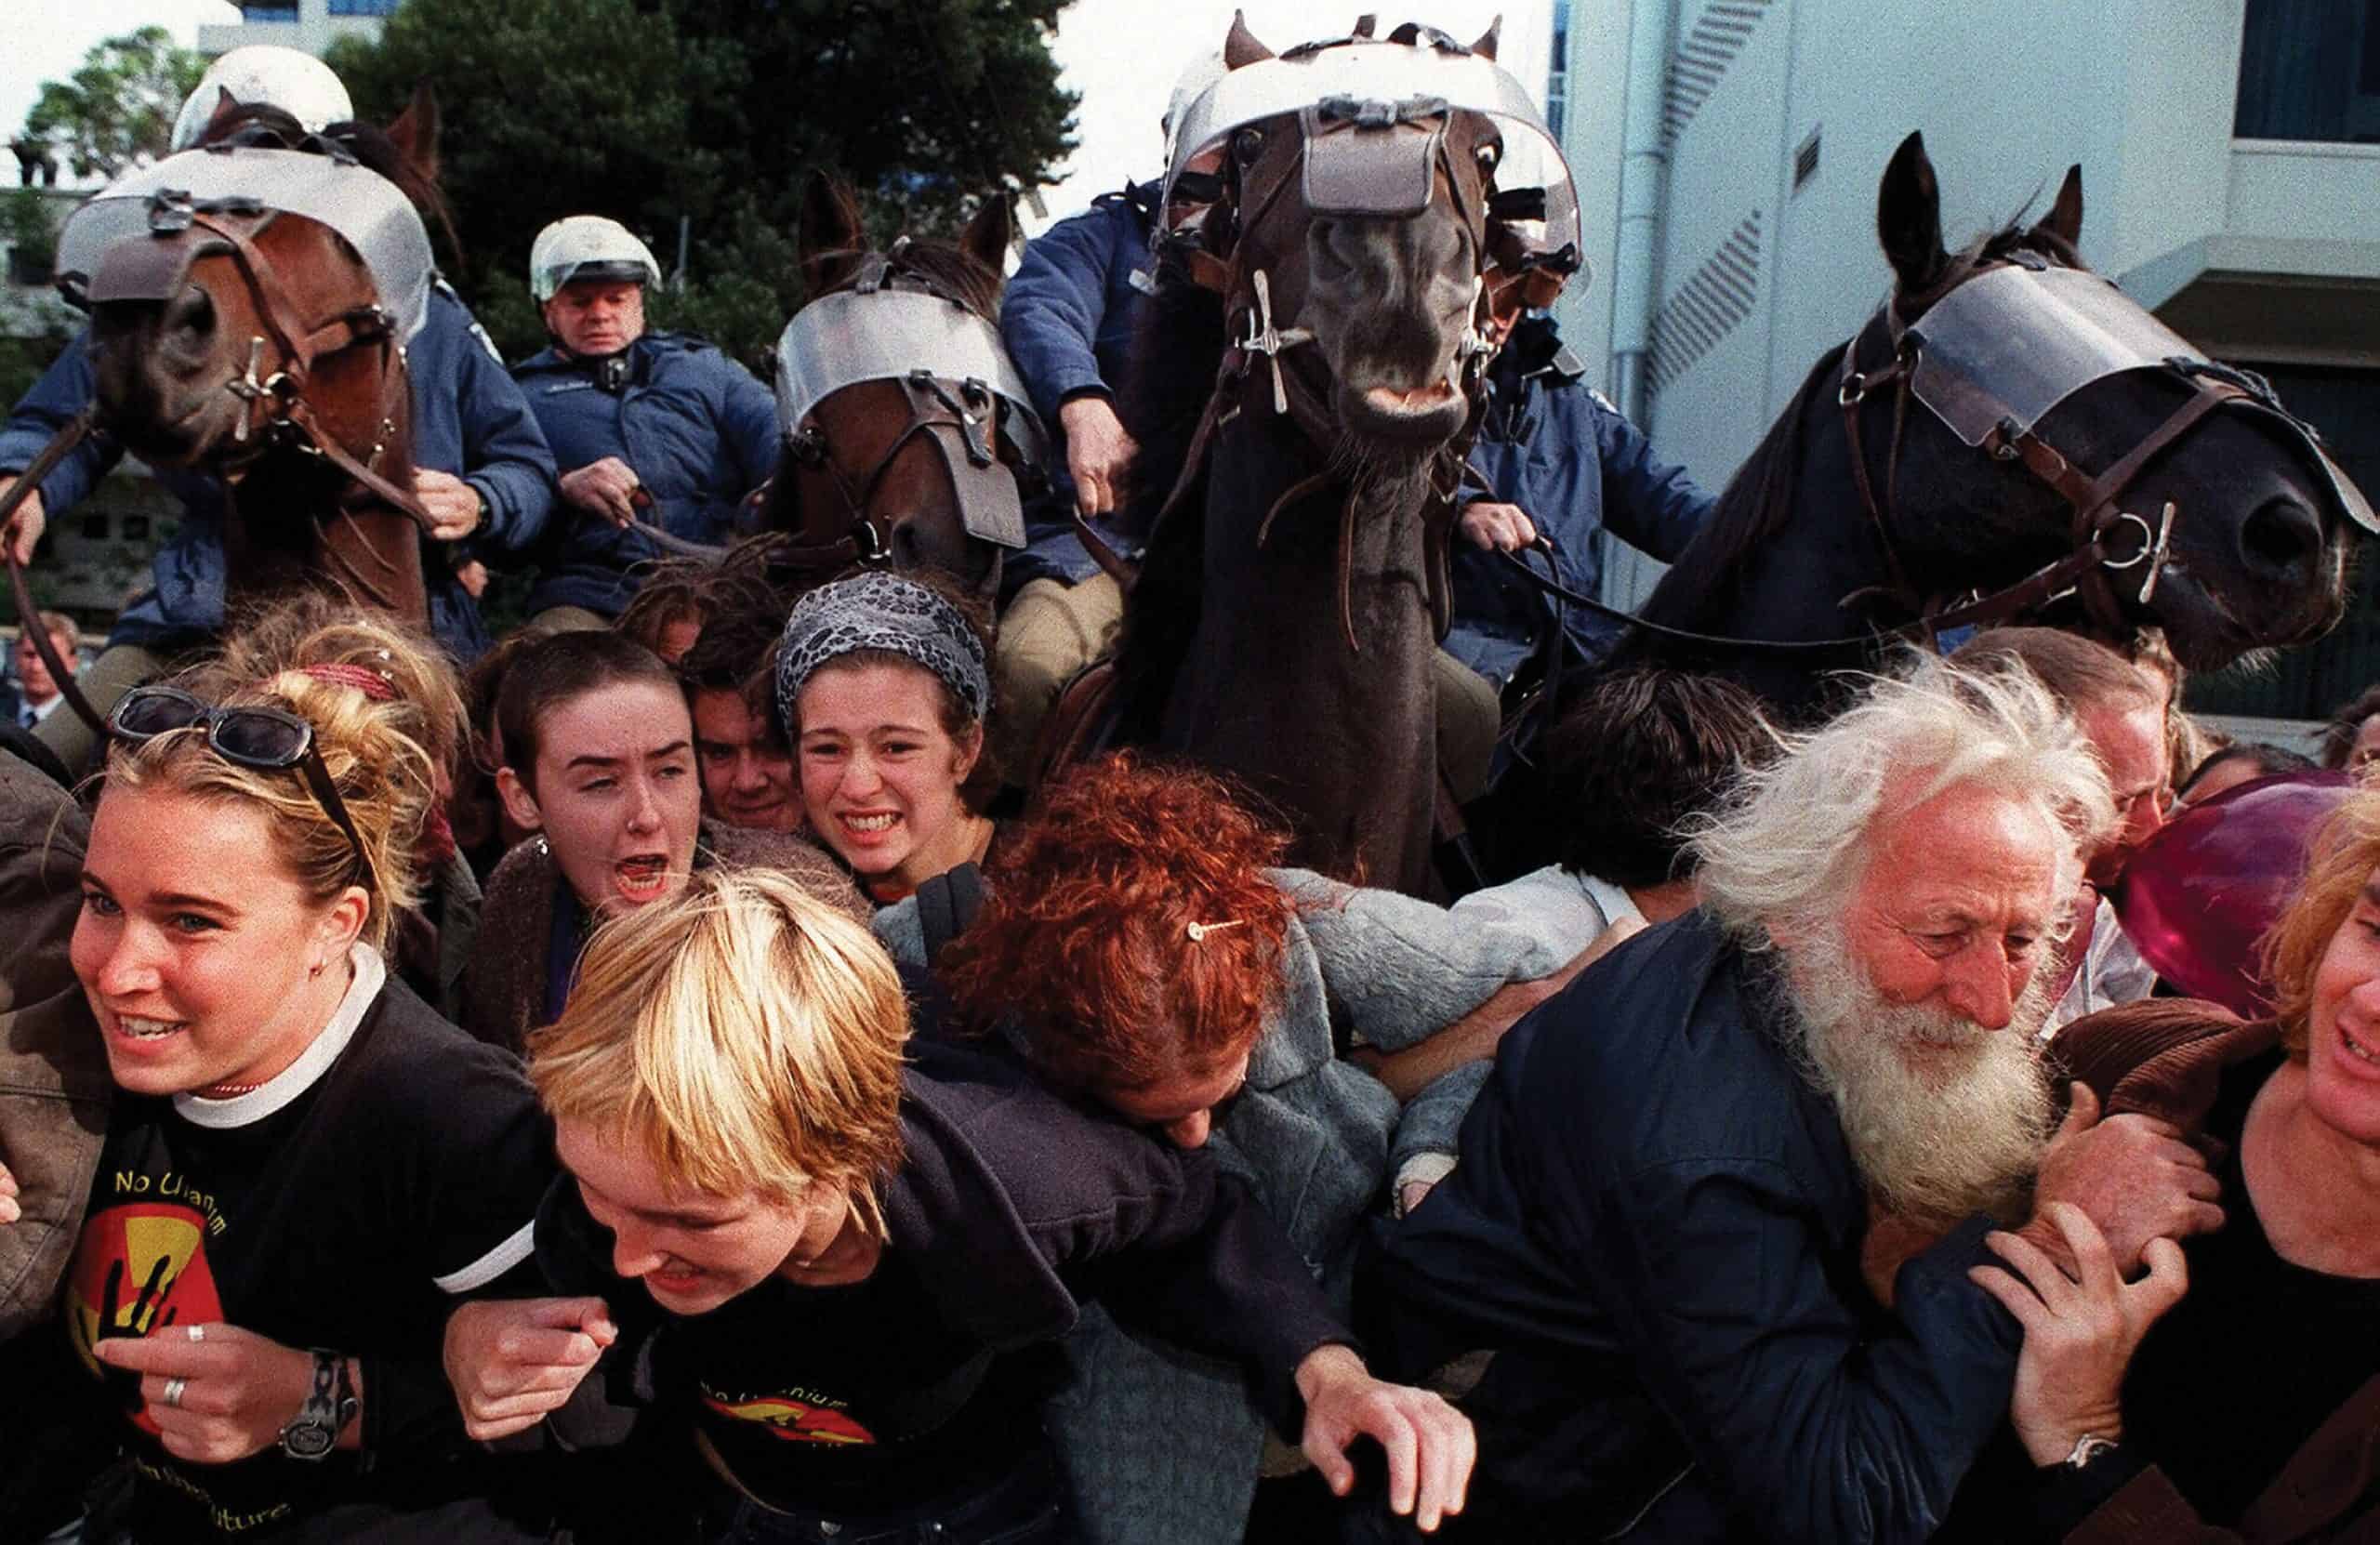 police on horses clash with protesters